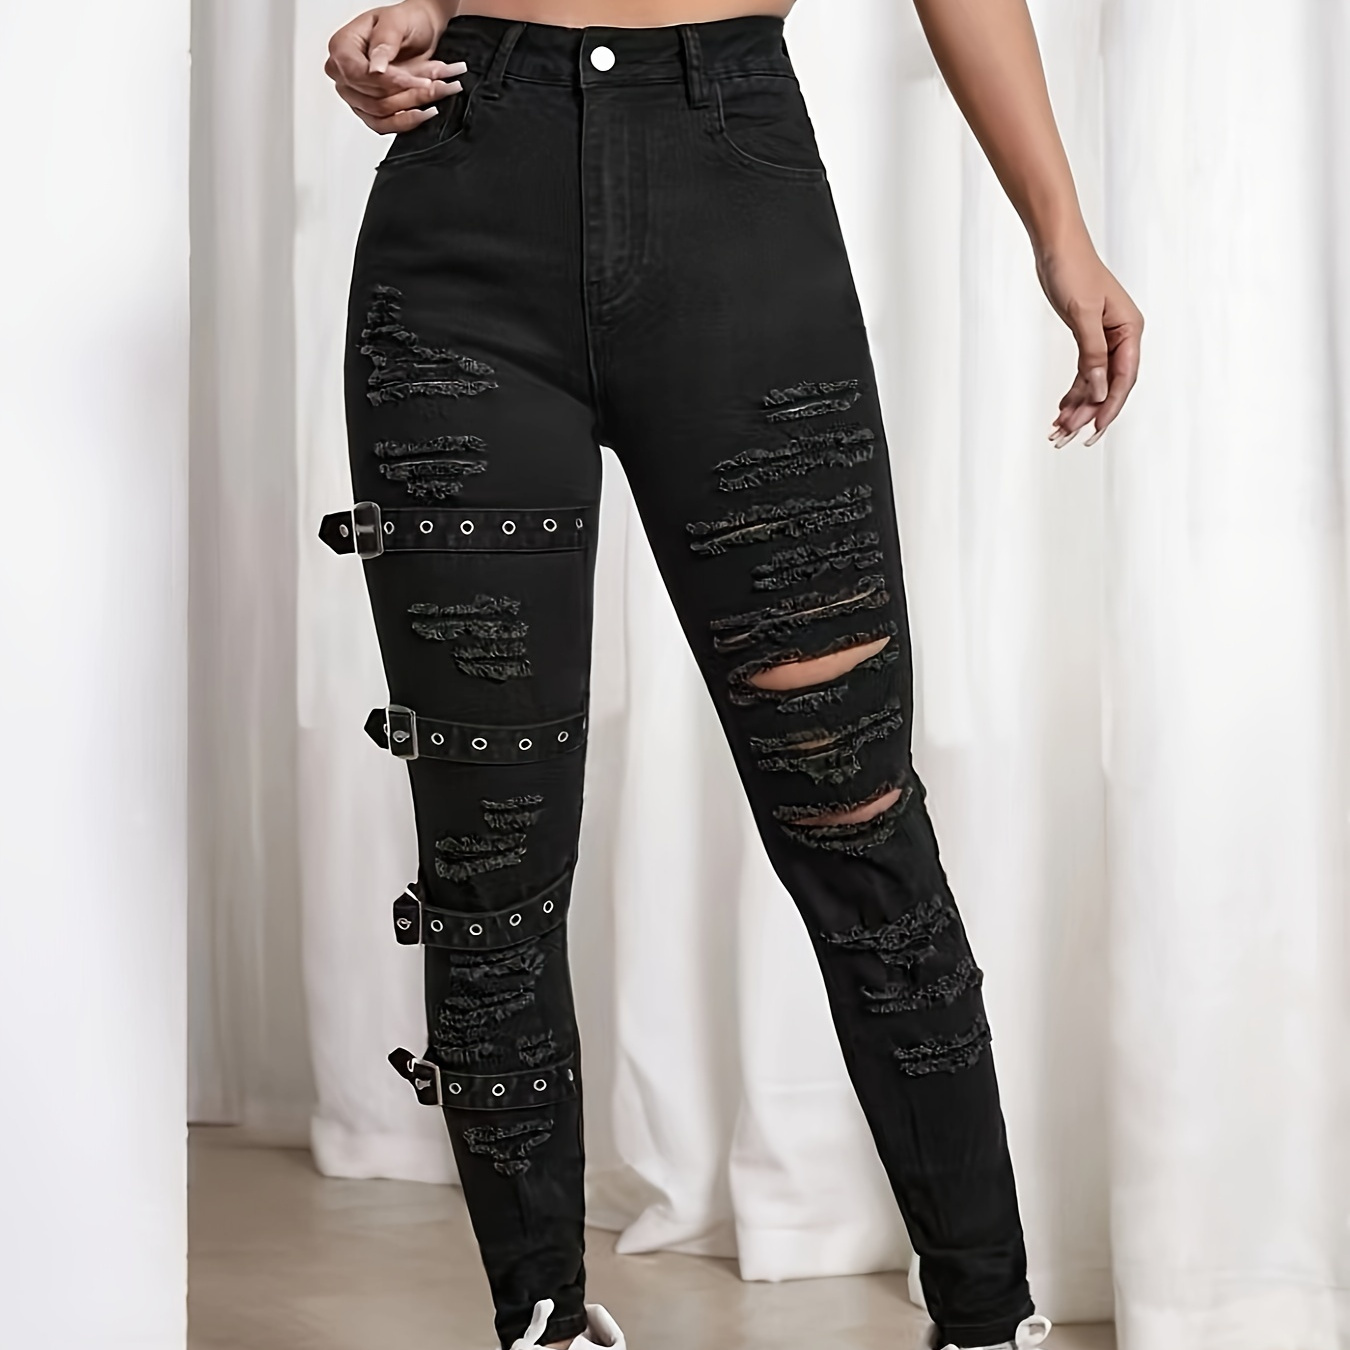 

Women's Stretchy Fashionable Distressed Skinny Jeans With Buckle Detail, Casual Style, Black Color Plain Denim Pants